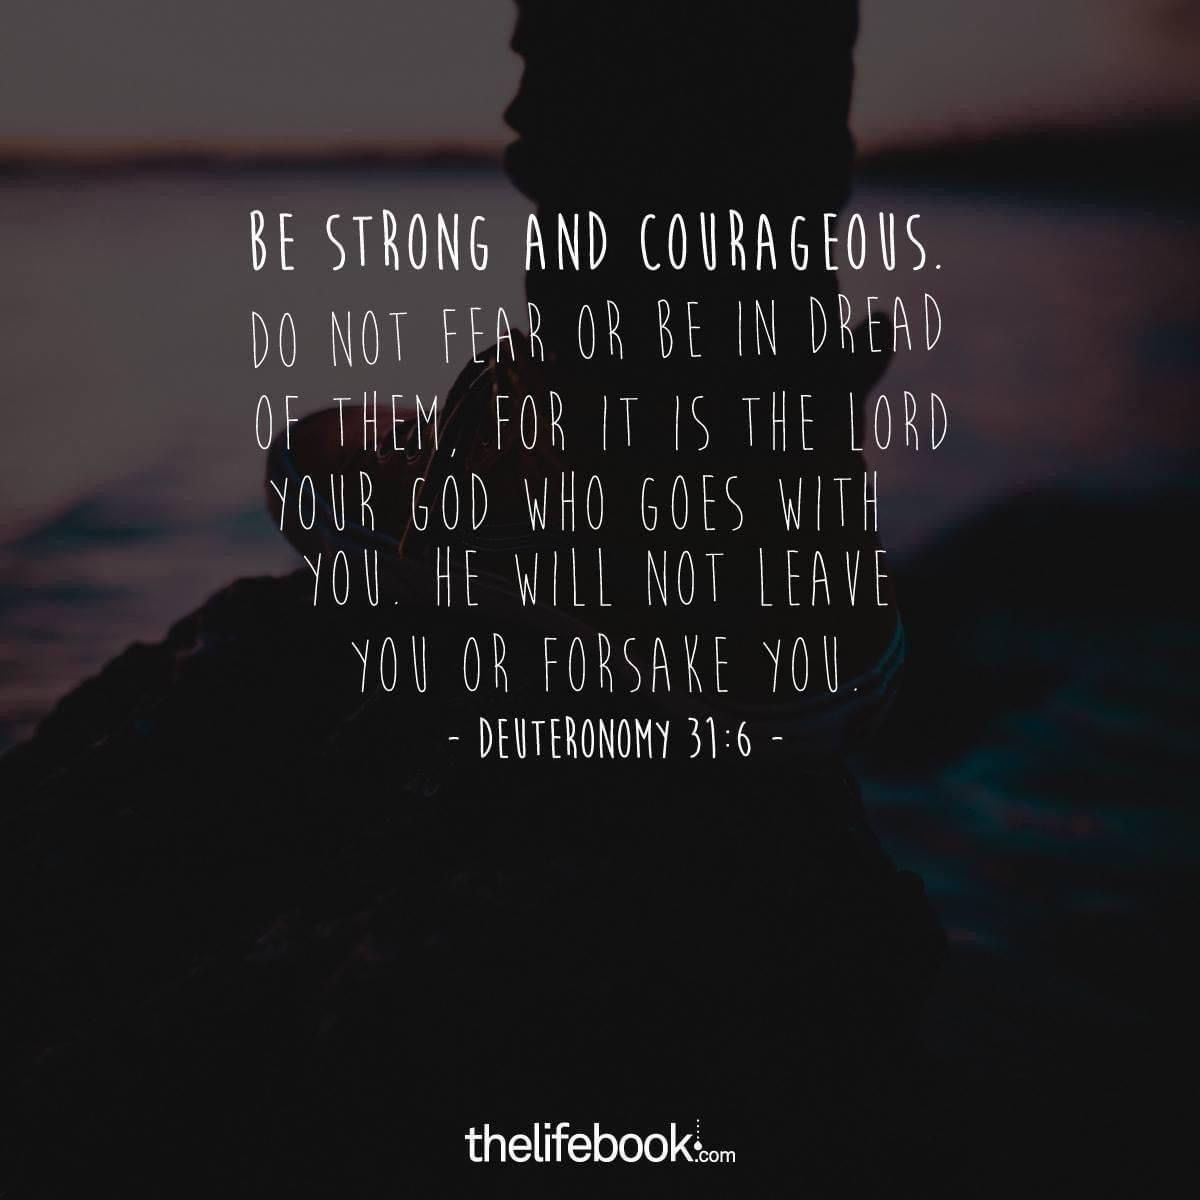 'BE STRONG AND COURAGEOUS DONOT DO NOT FEAR OR BE INDREAD OF THEM, LORD YOUR GOD WHO GOES WITH YOU HE WILL NOT LEAVE YOU OR FORSAKE YOU DEUTERONOMY 31:6- thelifebook.com'